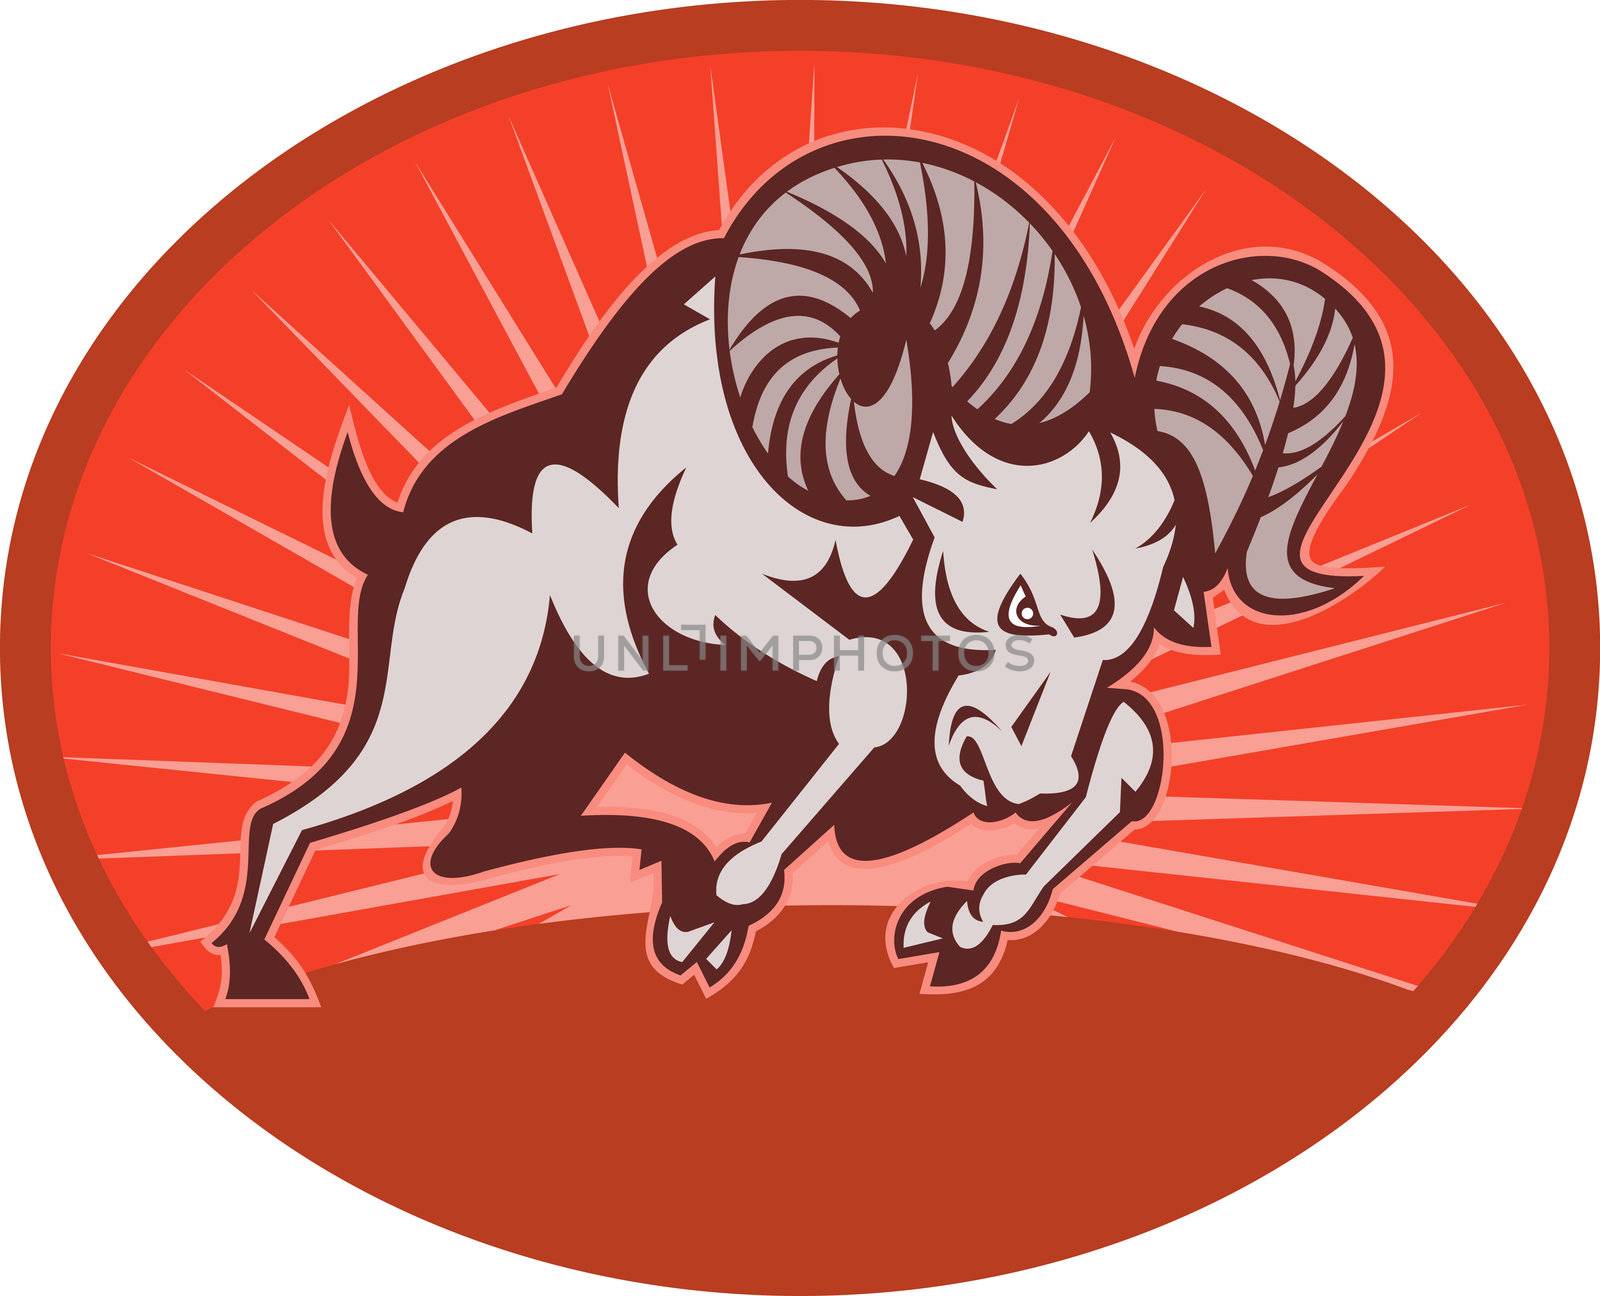 illustration of a Bighorn sheep or ram attacking with sunburst in the background set inside an oval.